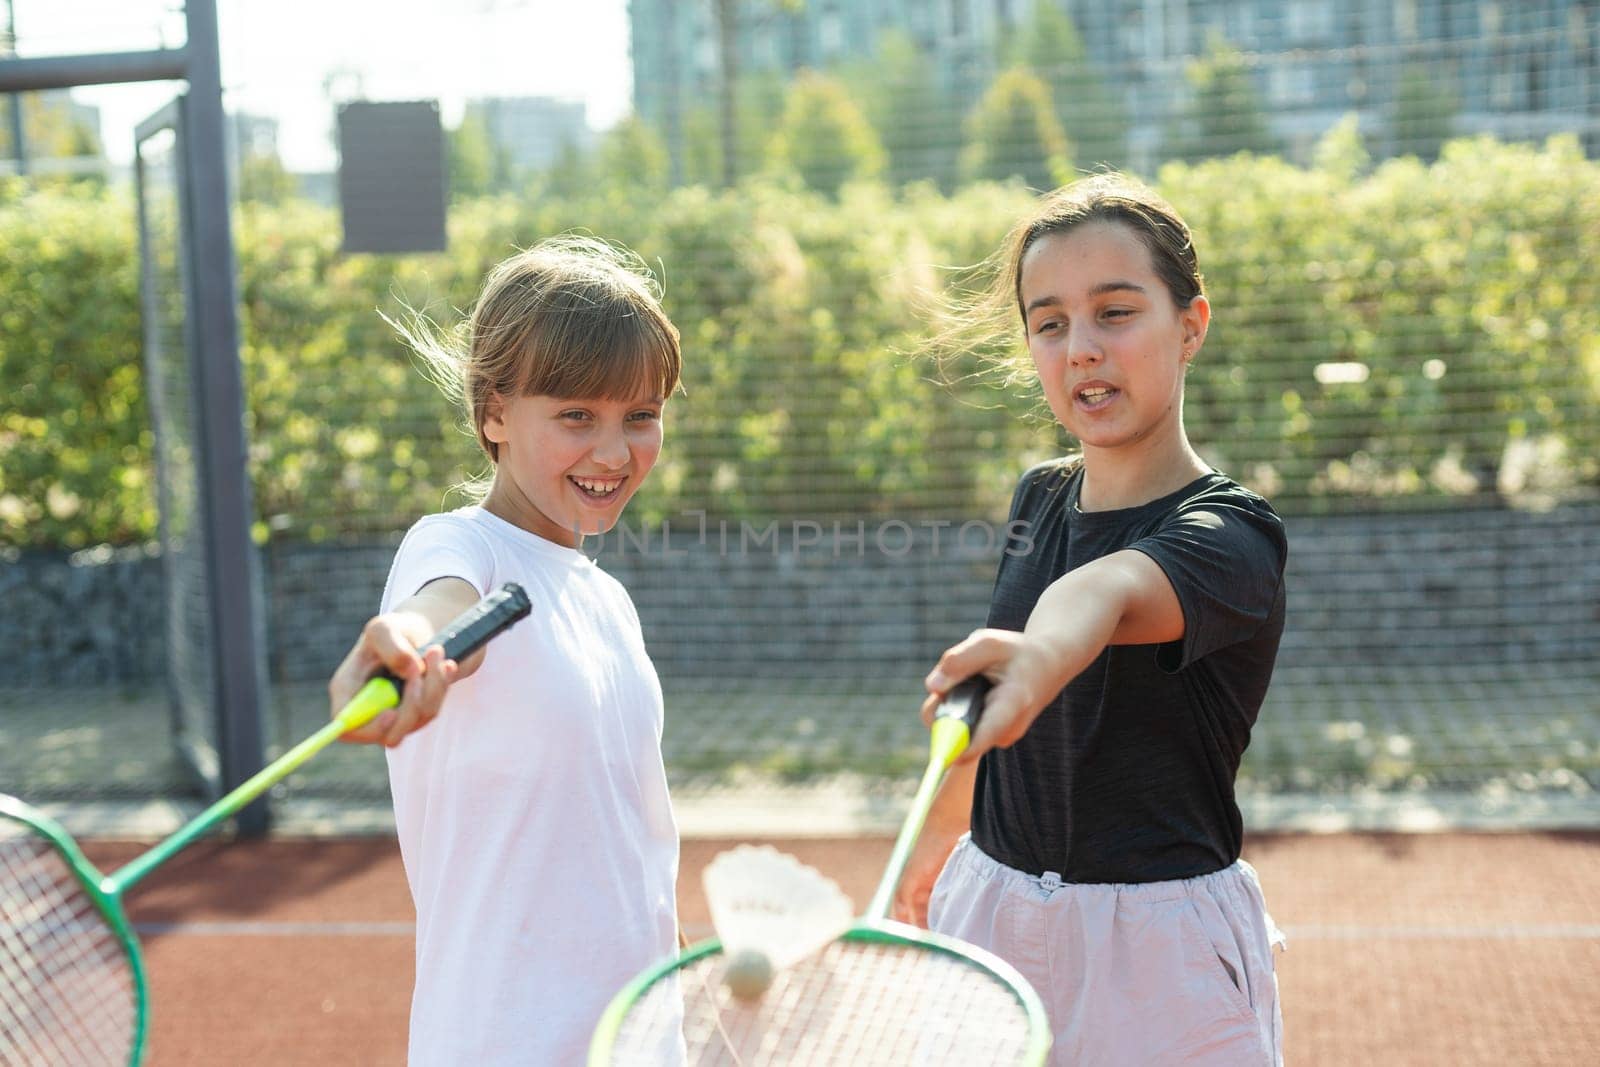 Young girls, athletes shaking hands before game session. Playing tennis on warm sunny day at open air tennis court. Concept of sport, hobby, active lifestyle, health, endurance and strength, ad. High quality photo